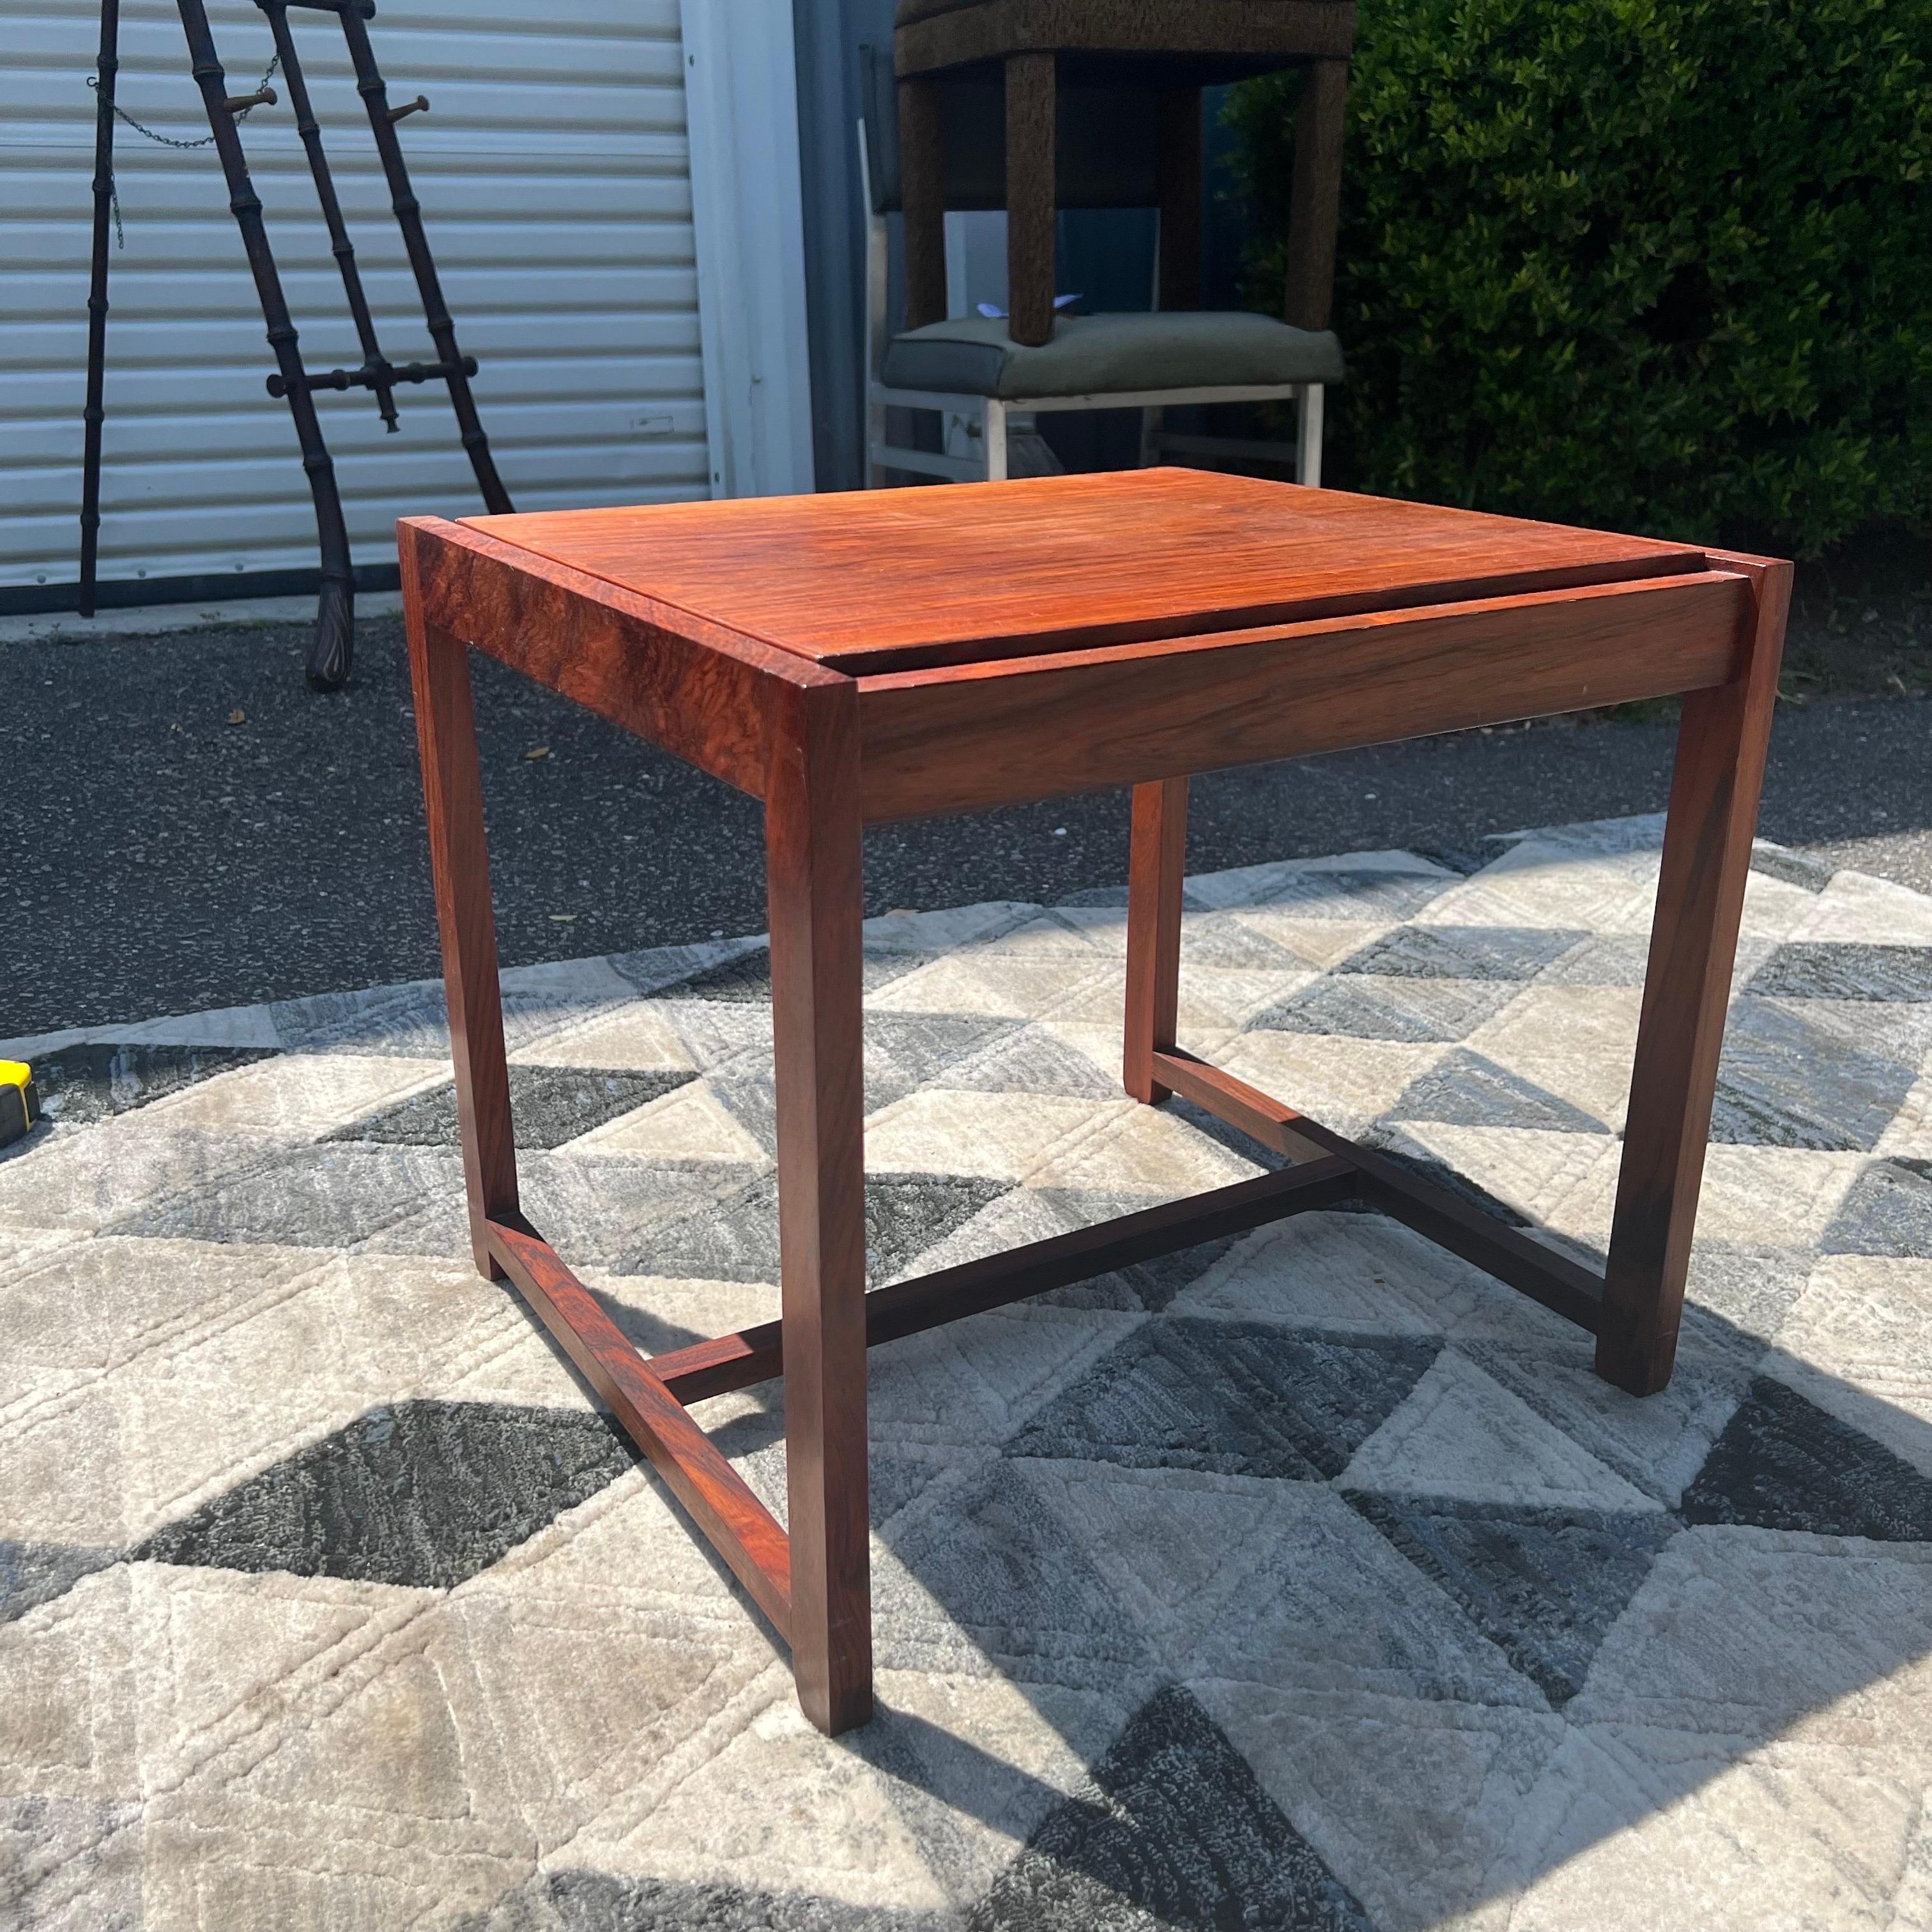 Multifunctional 1950’s Danish rosewood side table that cleverly converts into a comfortable stool. Designed by Erik Buch. Excellent original condition.

Mid Century Danish Rosewood Flip-Top Side Table Stool

Flip-top stool with an ingenious design